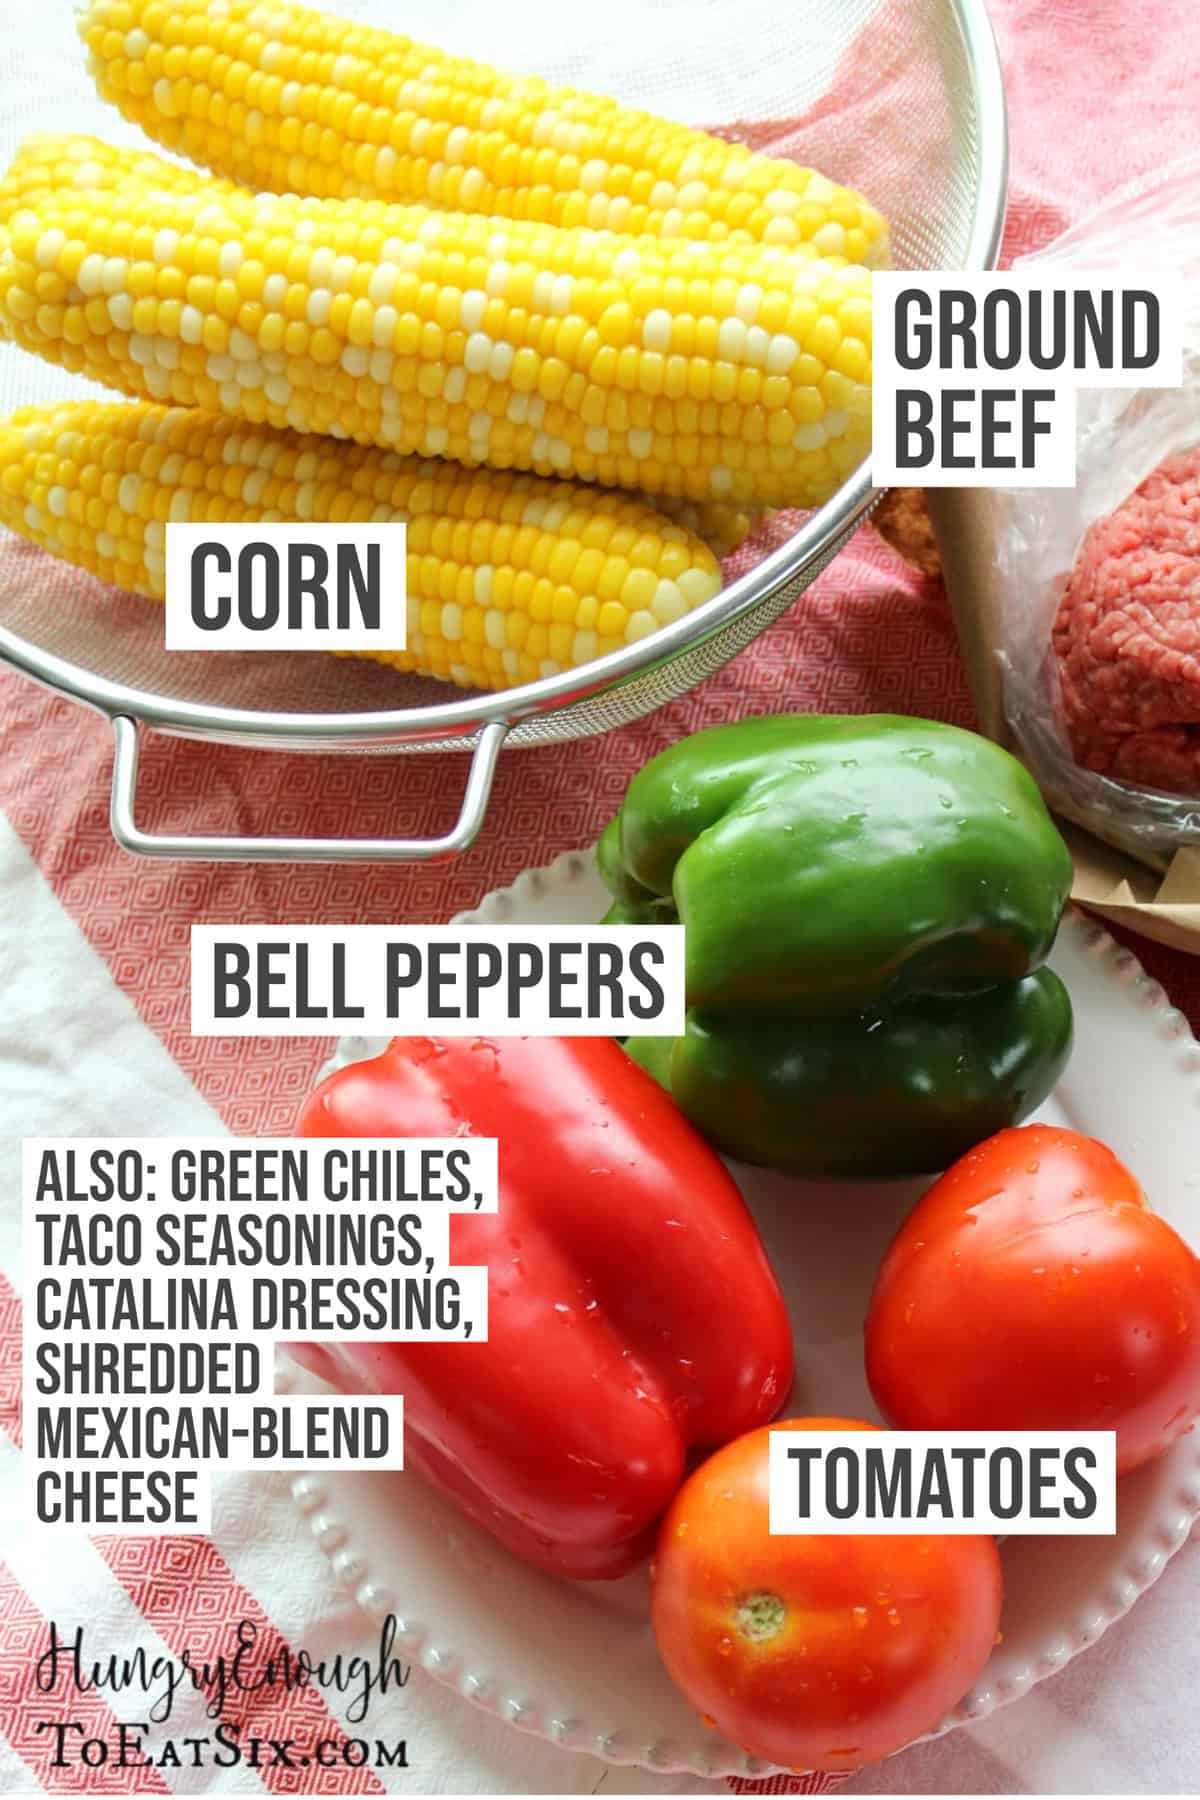 Ears of corn, peppers, tomatoes, and ground beef.